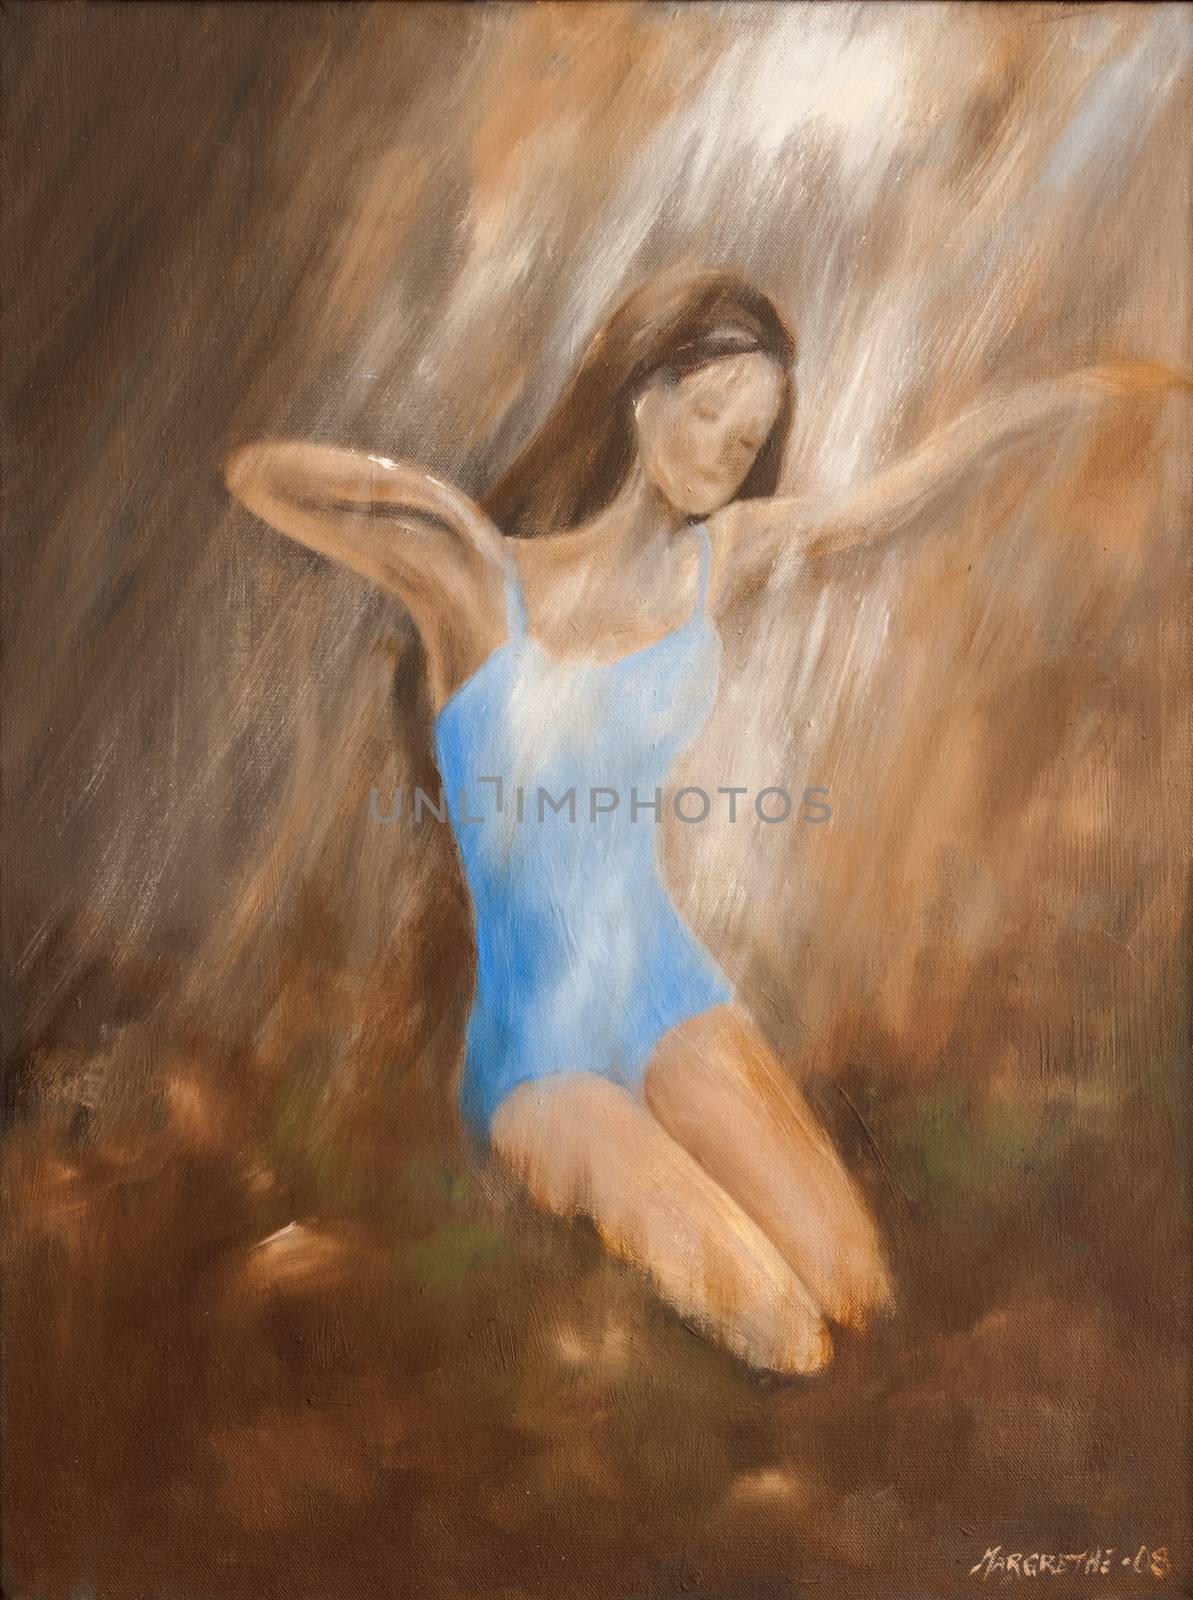 A beach scenery with a young woman in blue bathing suit sunbathing woman. A girl is stretching in the light. Oil painting on canvas. Summer landscape. Painted figurative art with oil on canvas. by QQJXw824zEfXDVTP9u